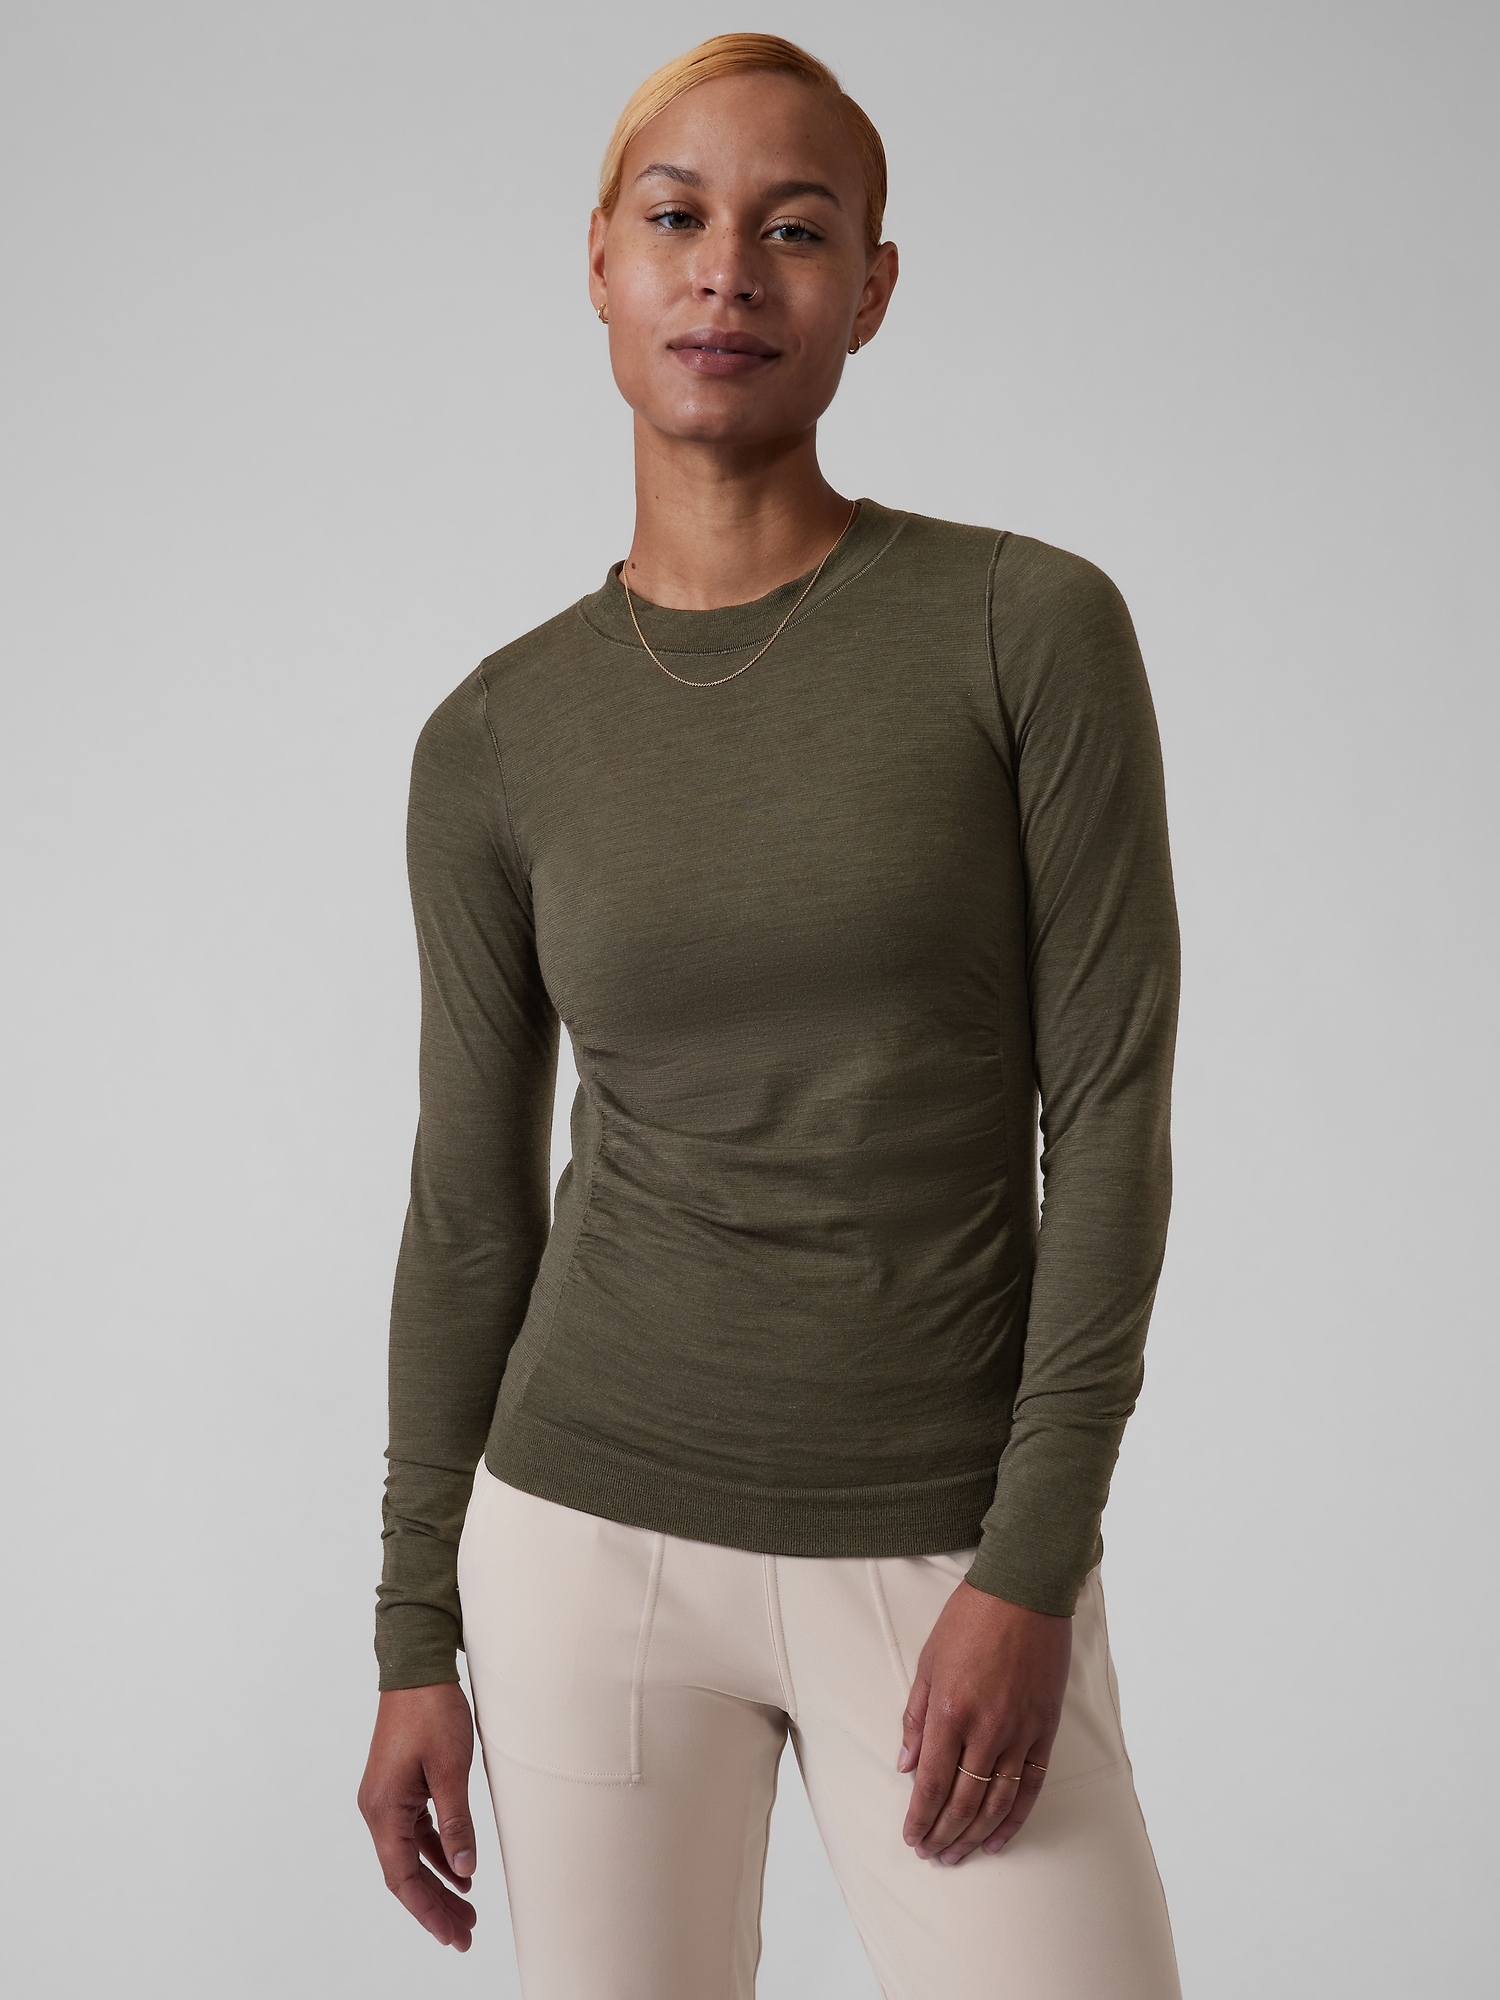 Foresthill Ascent Seamless Top | Athleta